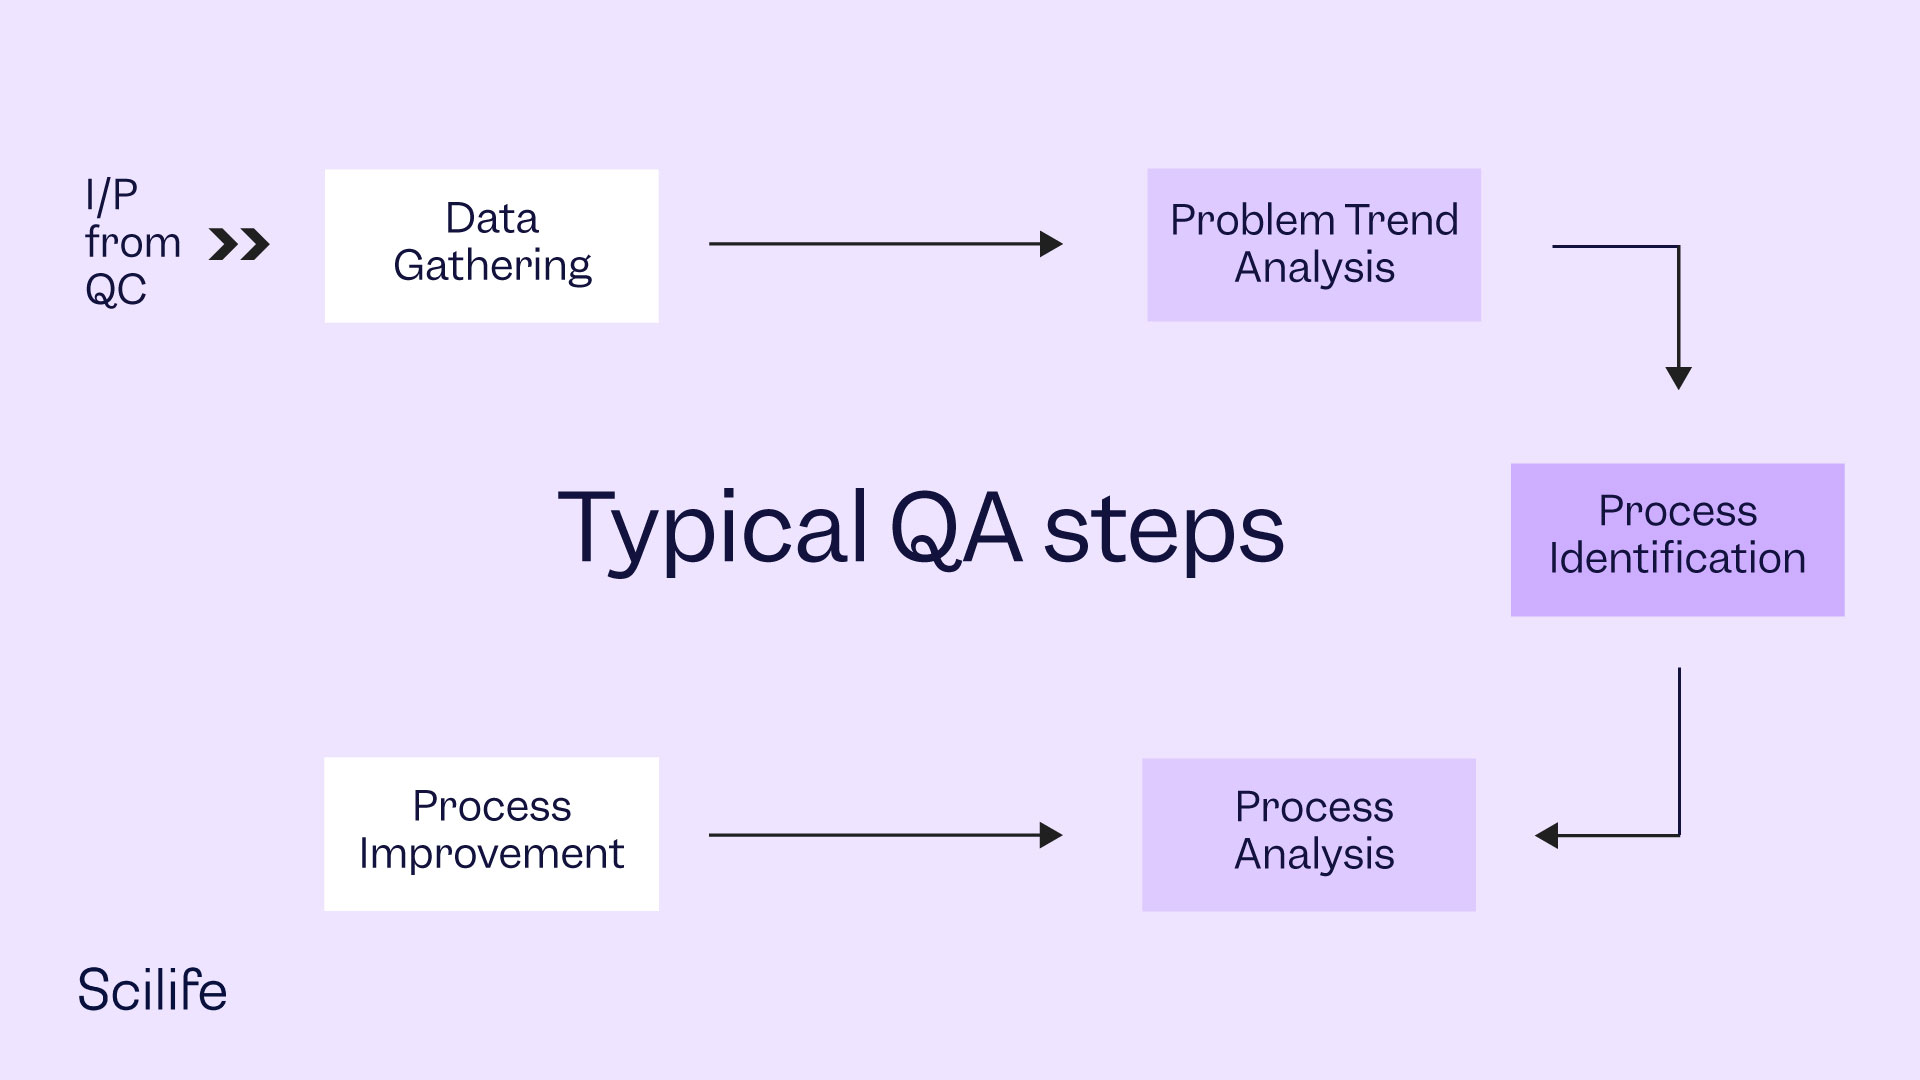 Illustration that shows typical Quality Assurance (QA) steps by Scilife.